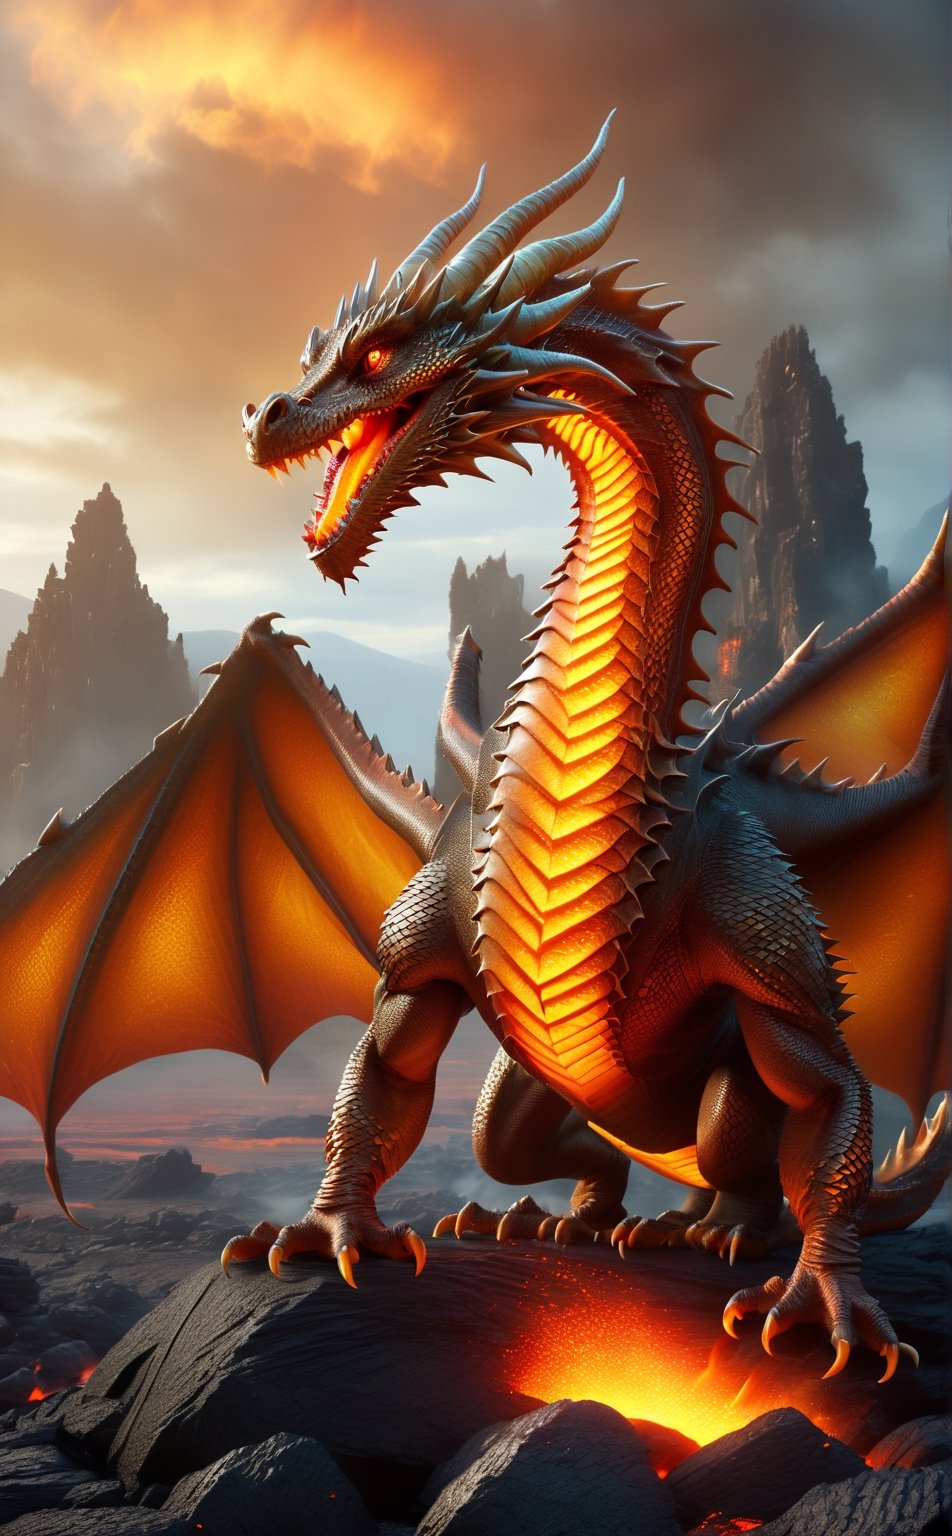 (masterpiece, photorealistic: 1.35), (CGI image of a dragon: 1.45), (majestic creature), (the dragon's scales created with exquisite details: 1.25), (the dragon's eyes shine: 1.31), (the dragon stands gracefully on a wide, lava rock: 1.1), ( The dragon has a powerful mouth 1,1), (Blender CGI software that can create breathtaking photorealistic scenes: 1.2), (the burnt landscape with falling dust flakes: 1.1), (the dragon's paws leave imprints in the ashes: 1.3), (surrounded by the silent beauty of the lava landscape: 1.1), (the captivating gaze of the dragon transports: 1.1), beautiful color correction, Unreal Engine, super resolution, megapixels,



8k wallpaper, awesome, (((masterpiece))), (((best quality))), ((ultra detailed)), (illustration), dynamic angle,DonMCyb3rN3cr0XL ,monster,Movie Poster